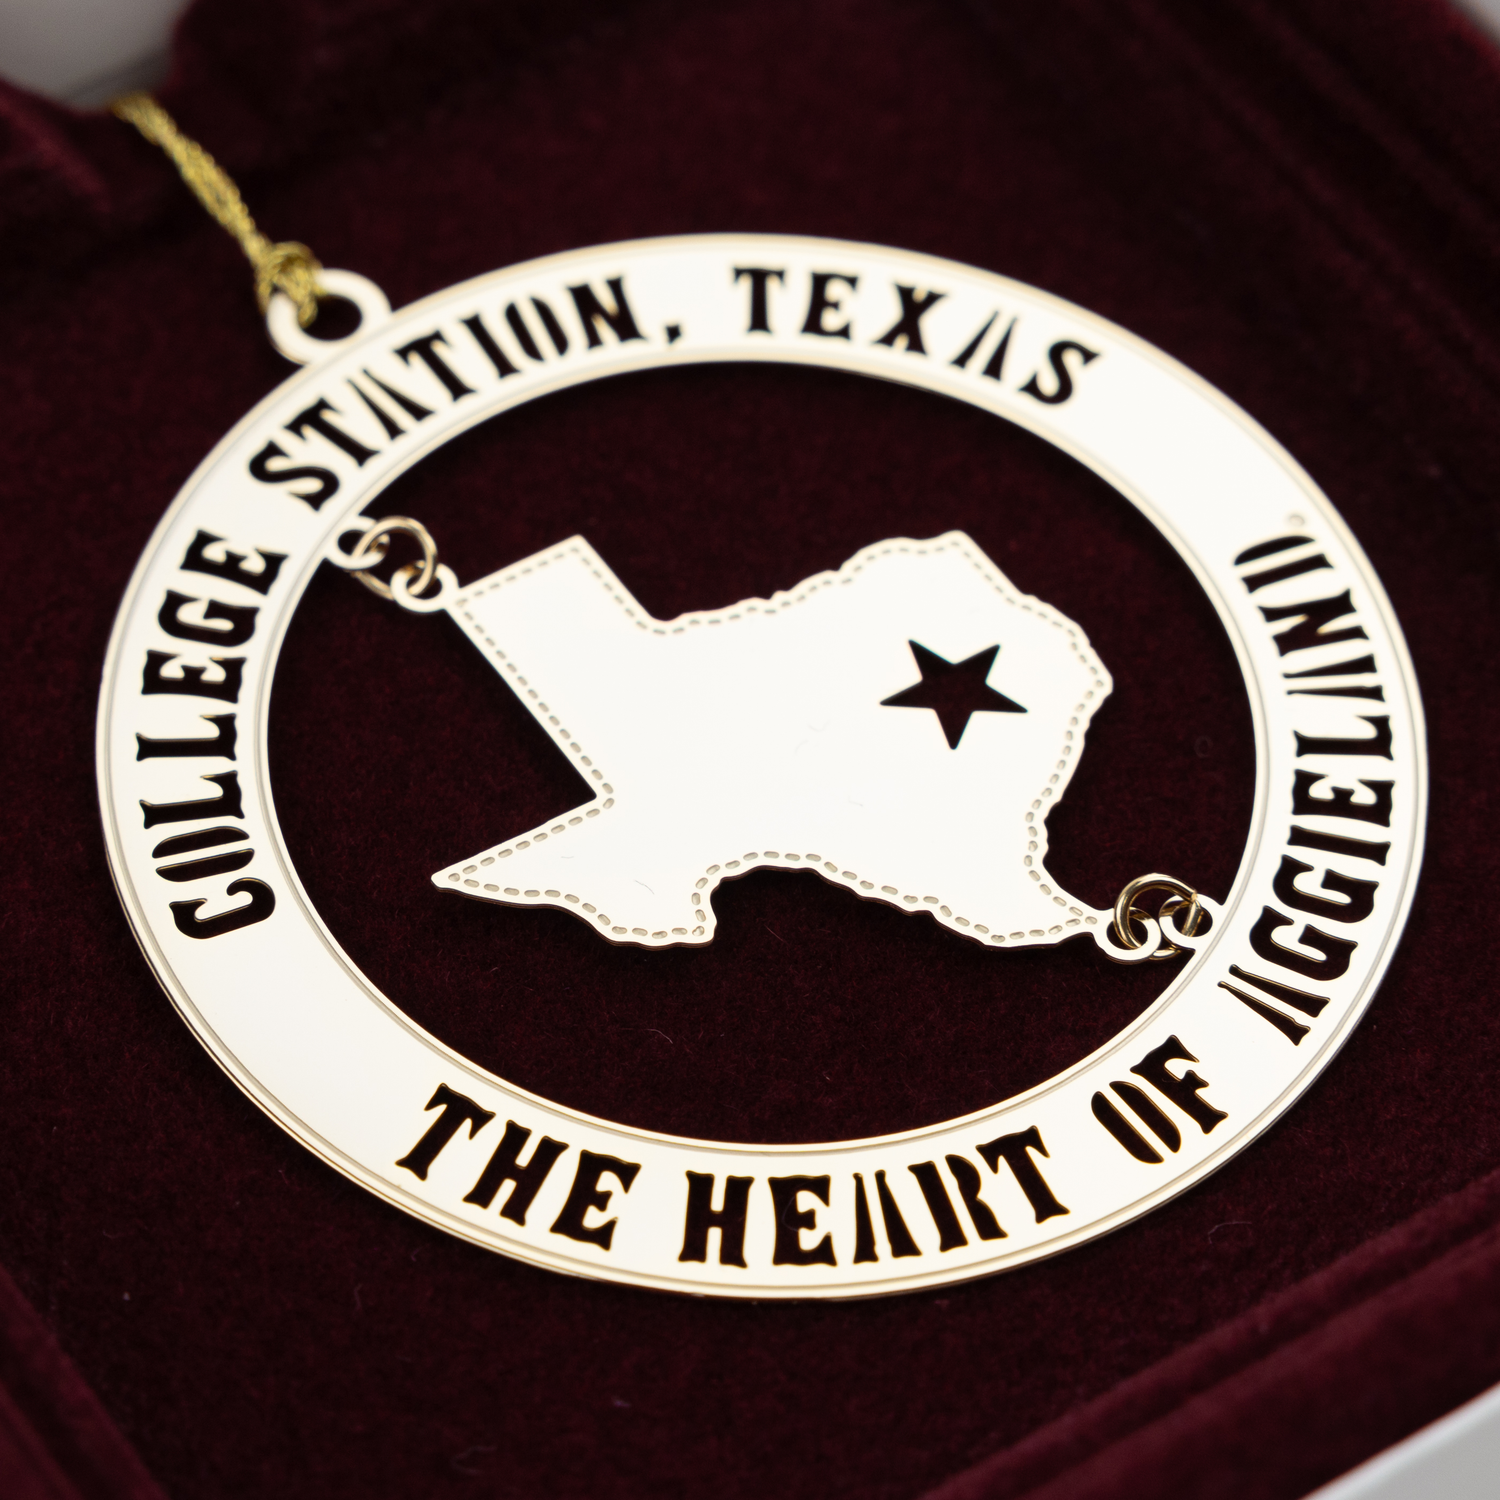 The Heart of Aggieland Ornament